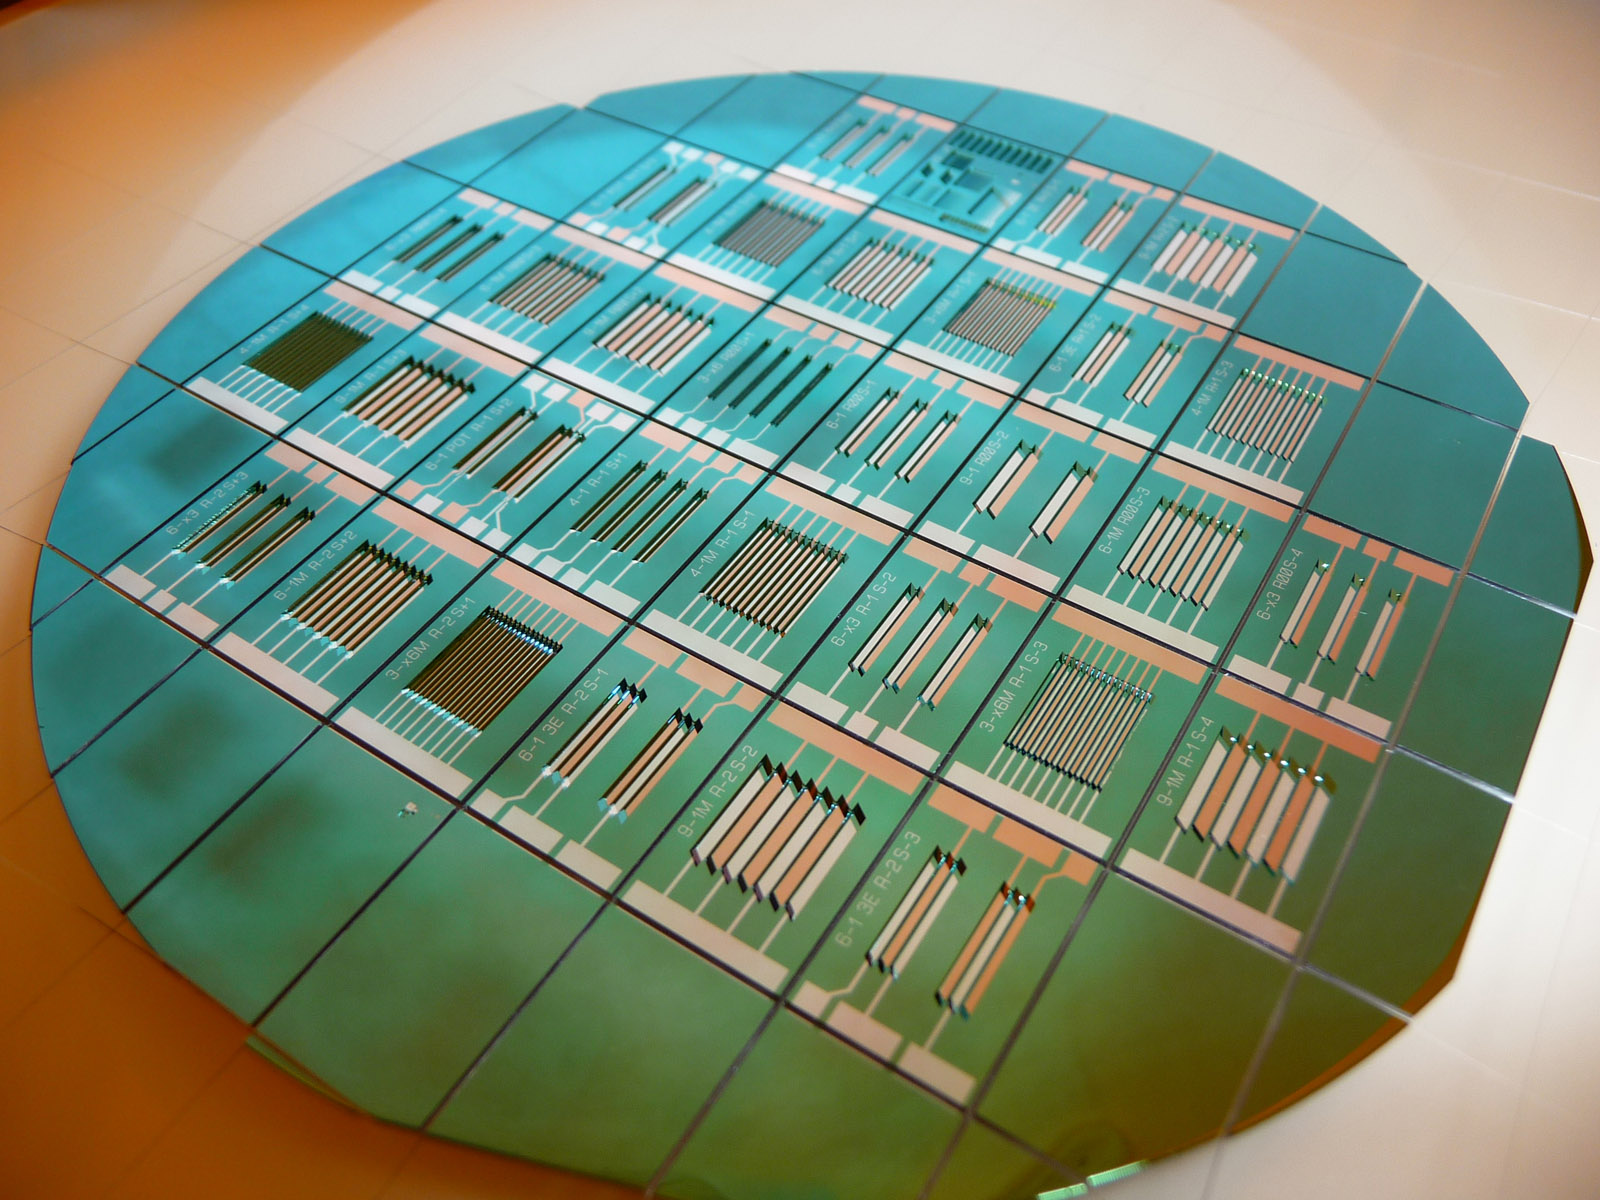 Fabrication of micro batteries with side-by side electrodes on silicon wafer 